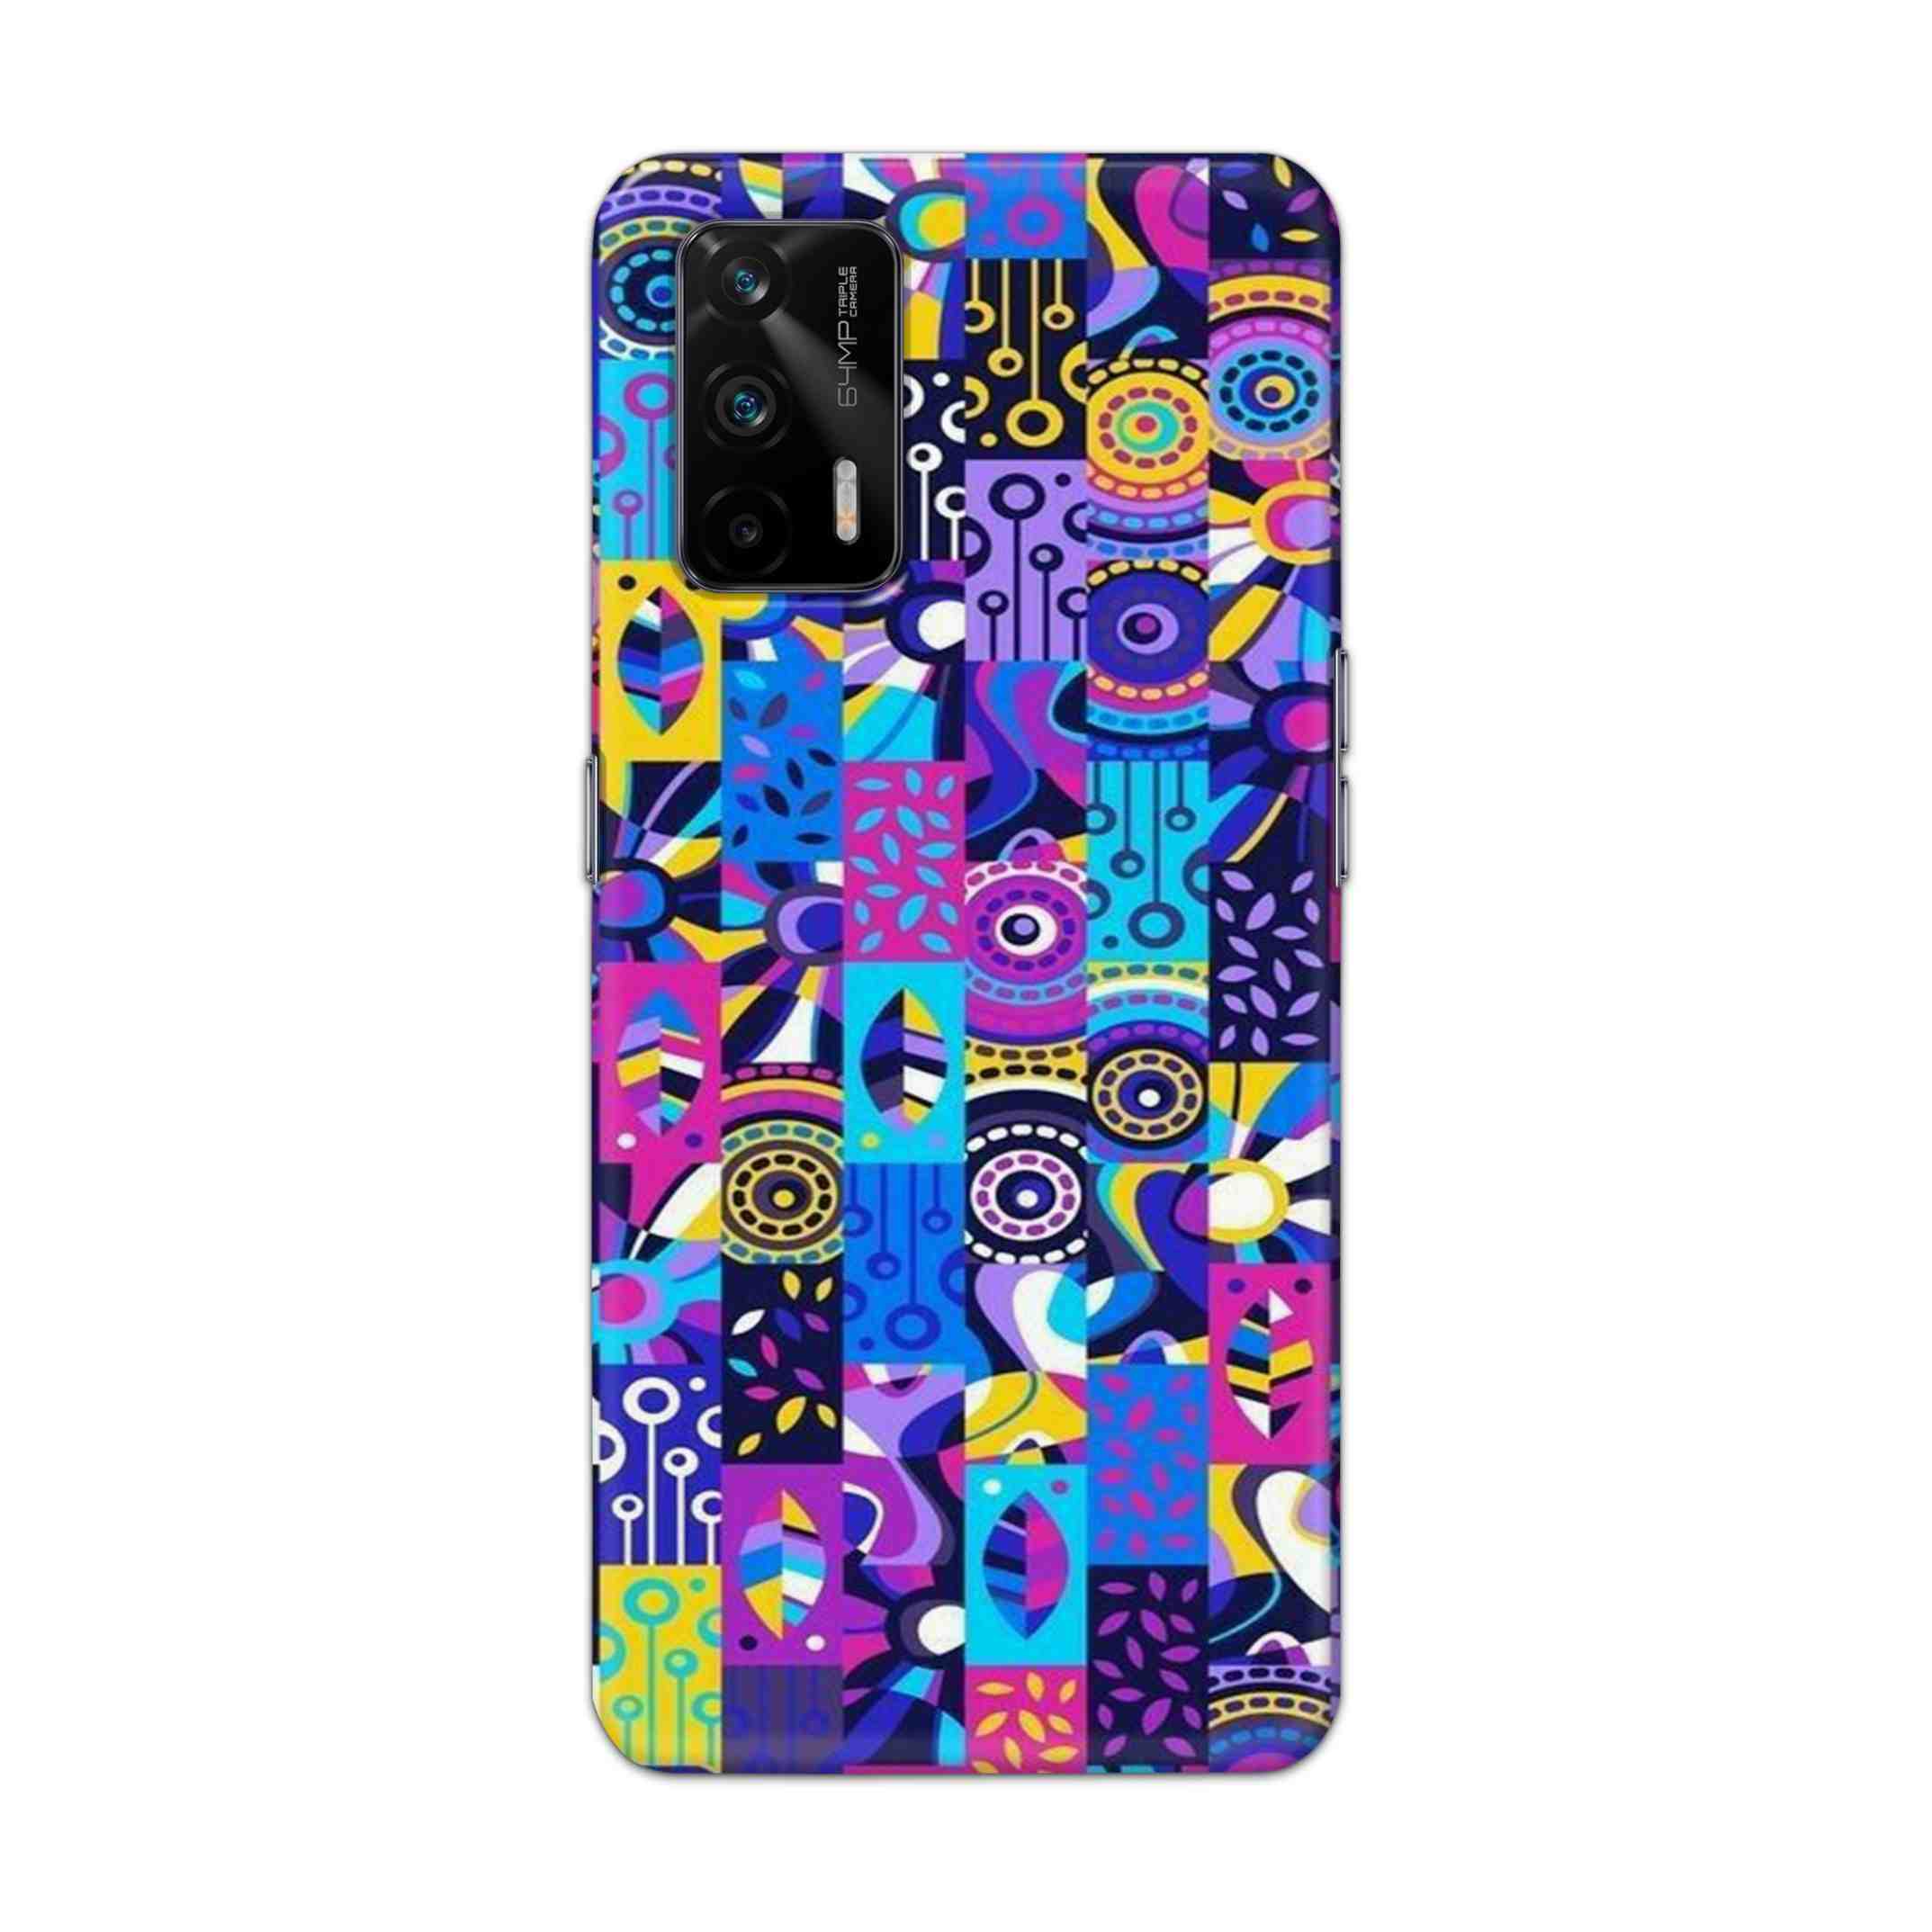 Buy Rainbow Art Hard Back Mobile Phone Case Cover For Realme X7 Max Online